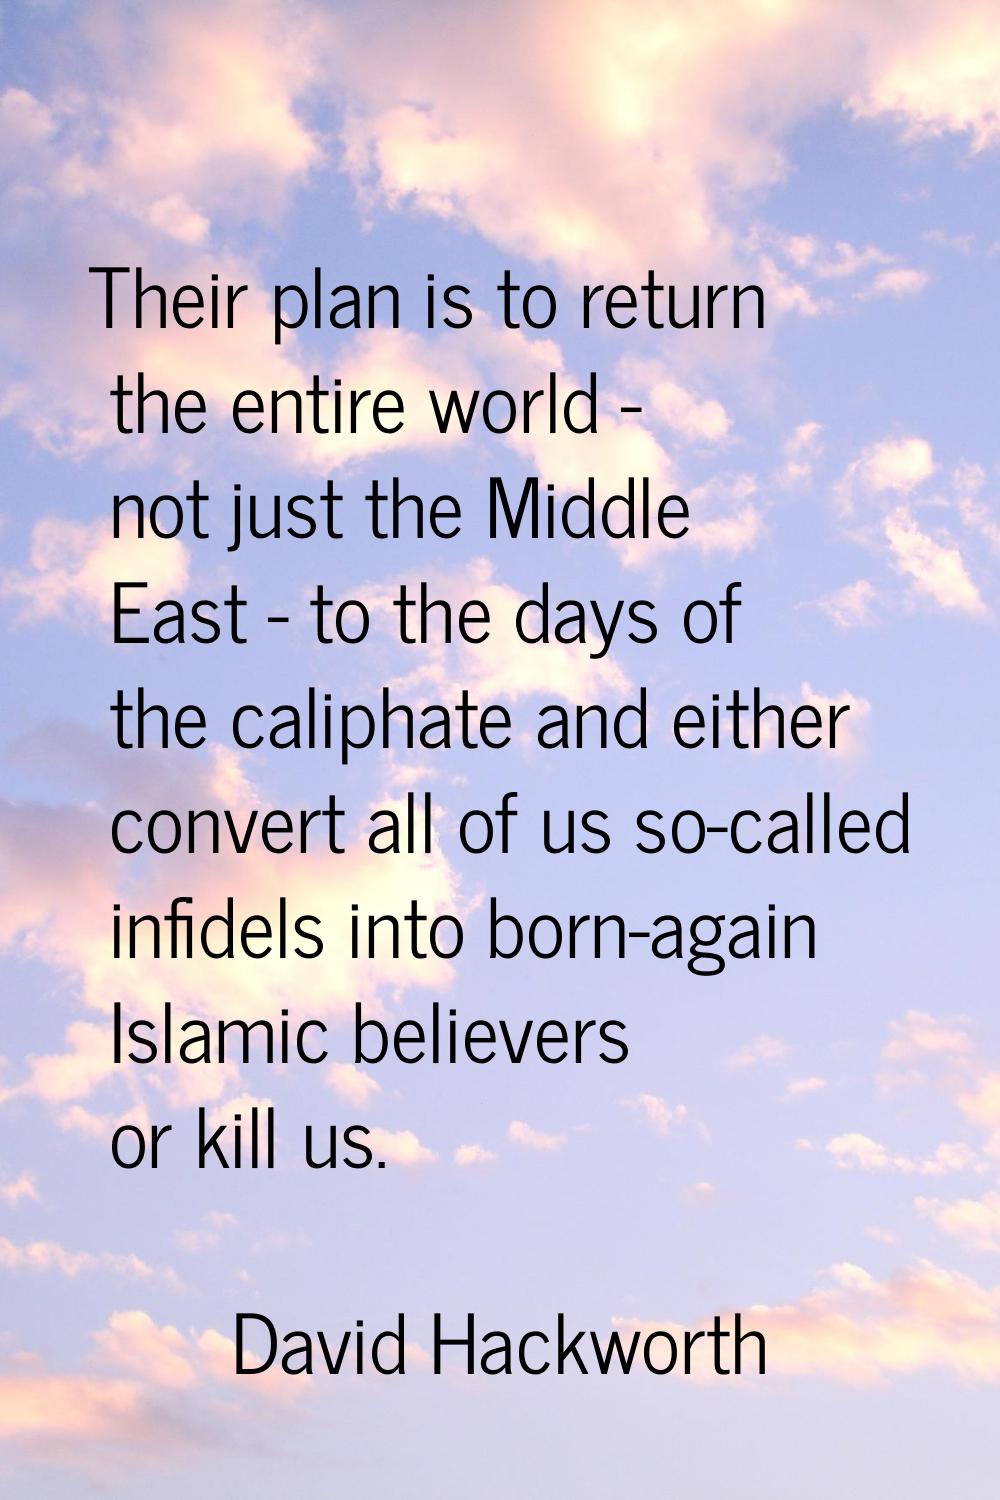 Their plan is to return the entire world - not just the Middle East - to the days of the caliphate 